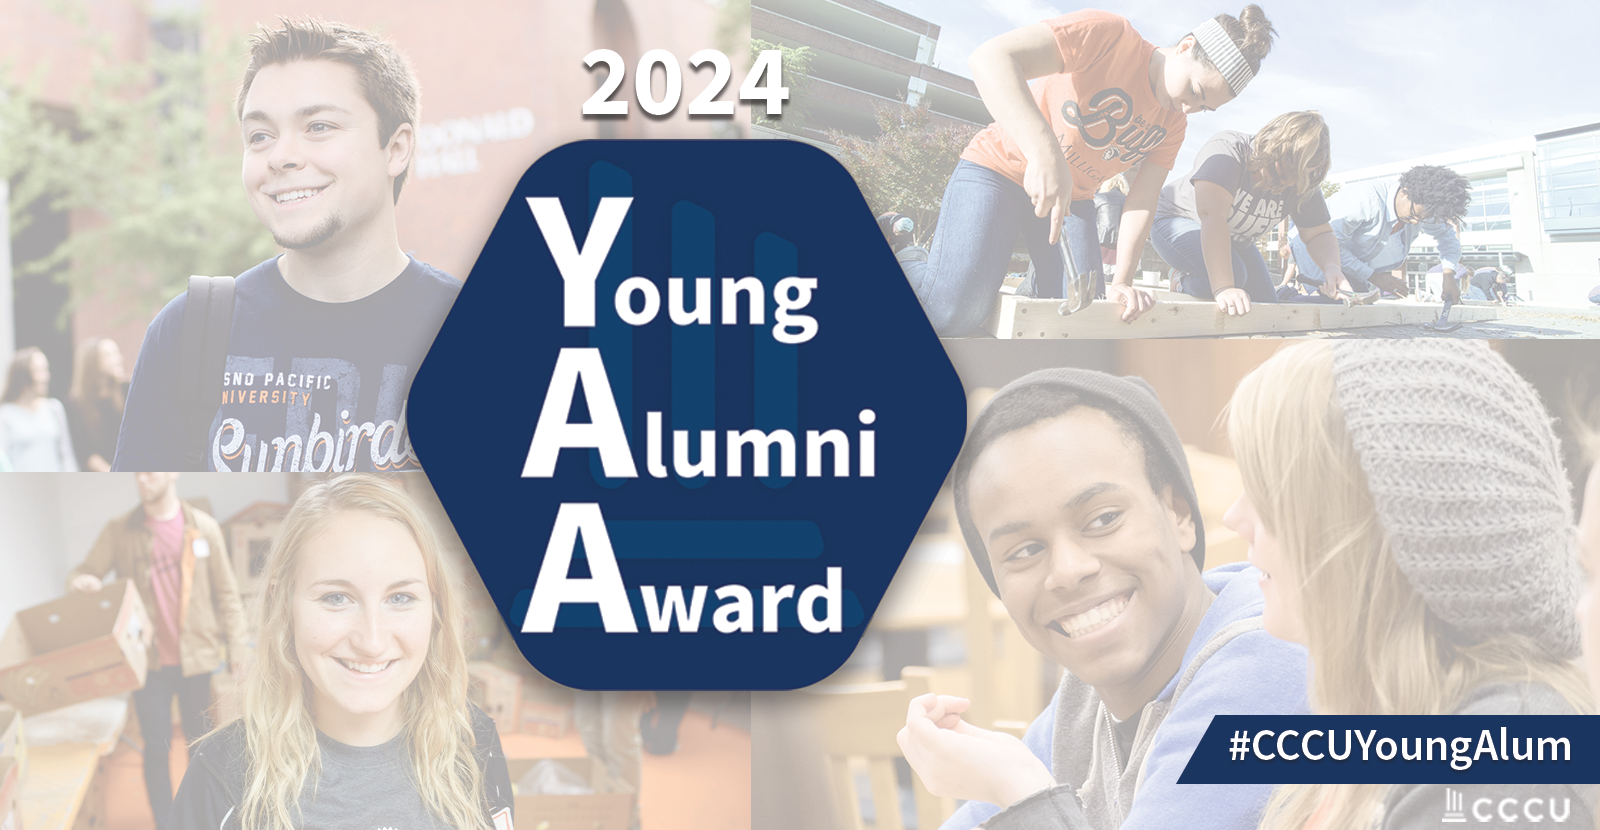 The Council for Christian Colleges & Universities Accepting Nominations for the 2024 CCCU Young Alumni Award